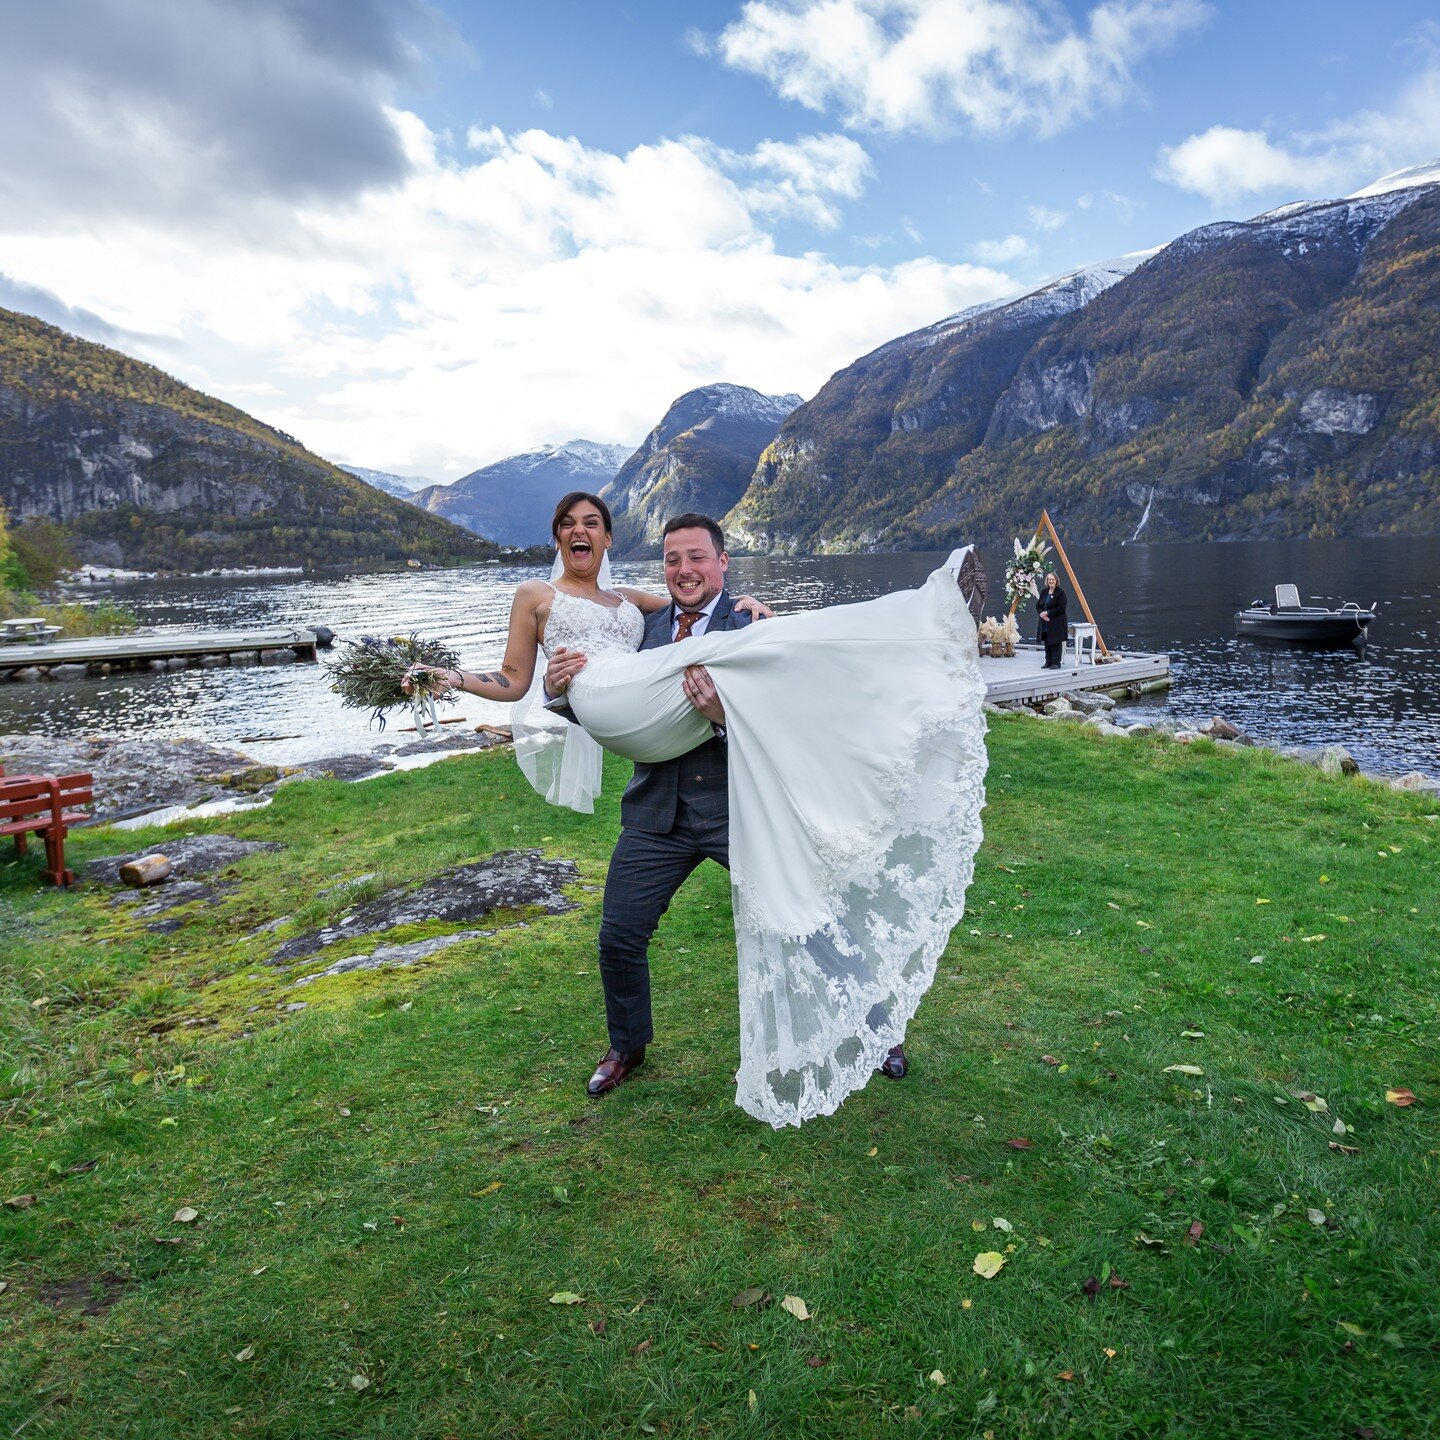 We have updated our website with gorgeous photos and useful info. Check it out so you are one step closer to having an epic elopement like this beautiful couple.

www.fjord.wedding

#fjordwedding #weddingnorway #norwaywedding #fjordelopement #elopenn